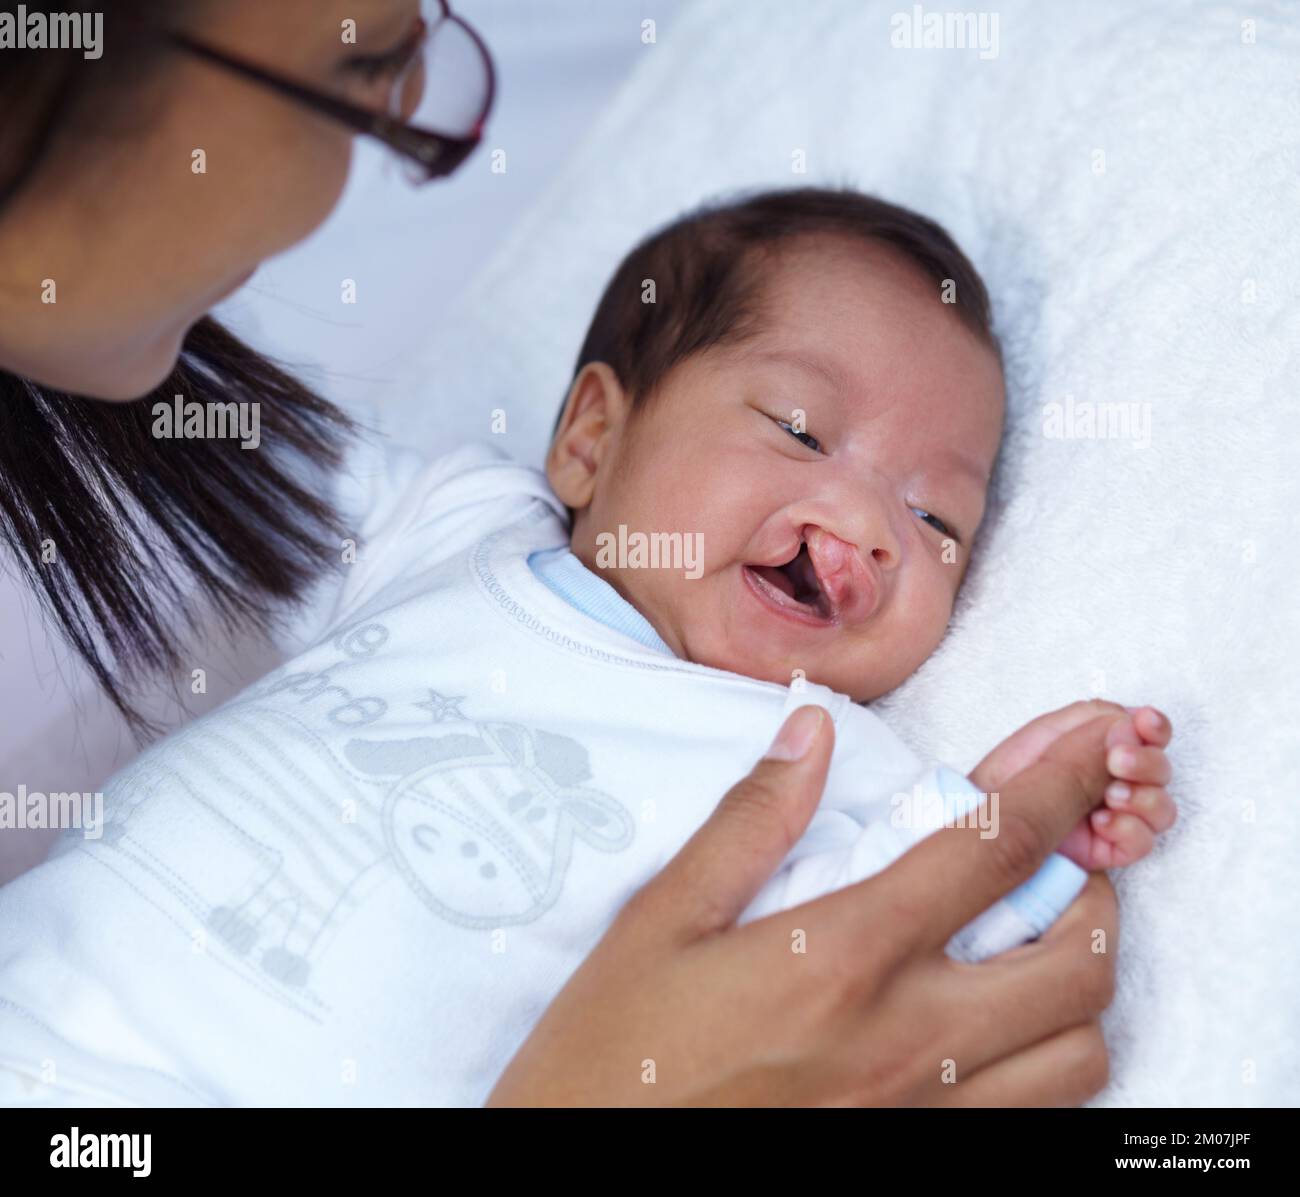 Showing her strong grip. A baby with a cleft palate holding her mothers finger and smiling. Stock Photo